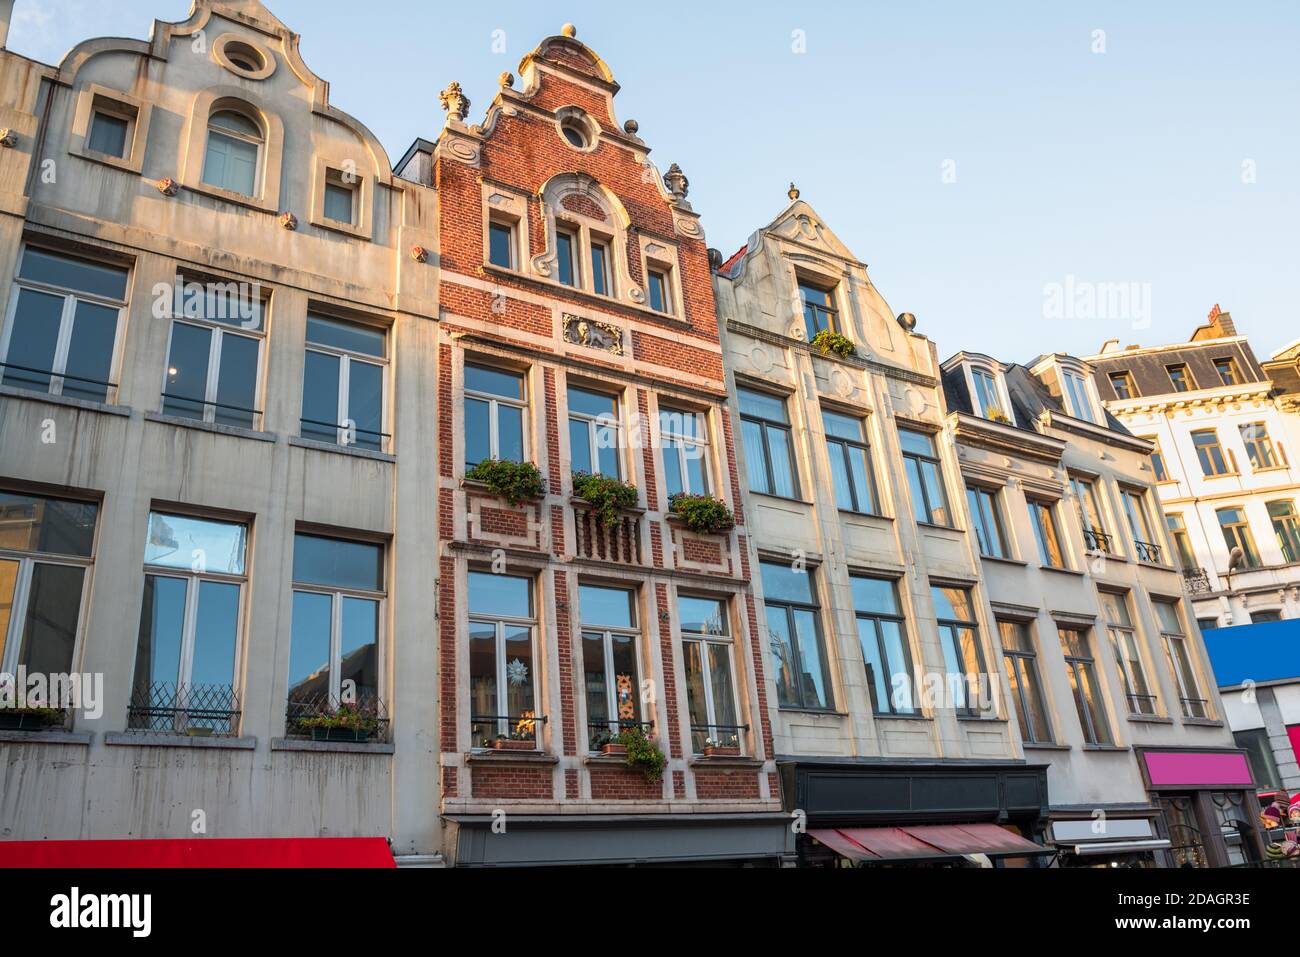 Historic architecture with colourful shopfronts in central Brussels, Belgium, at sunset in winter Stock Photo